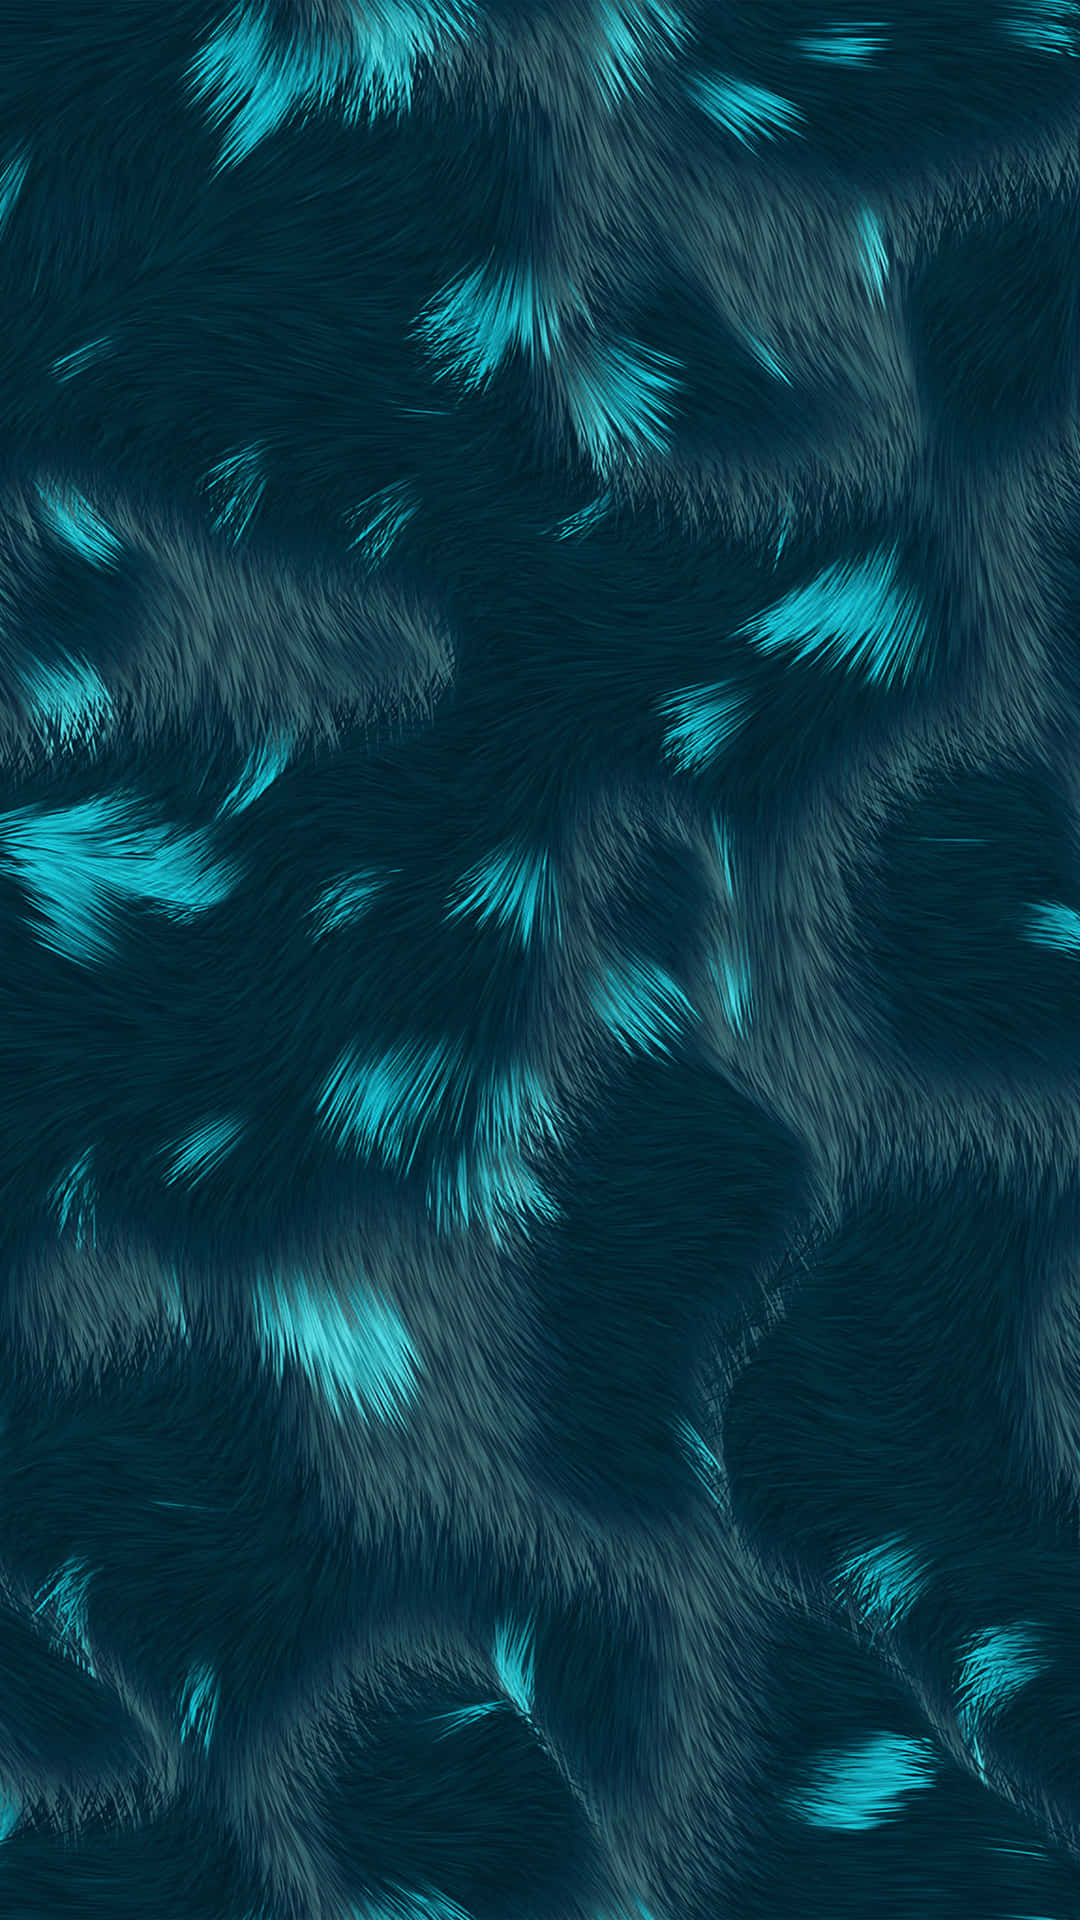 Fuzzy Blue Feathers Wallpaper